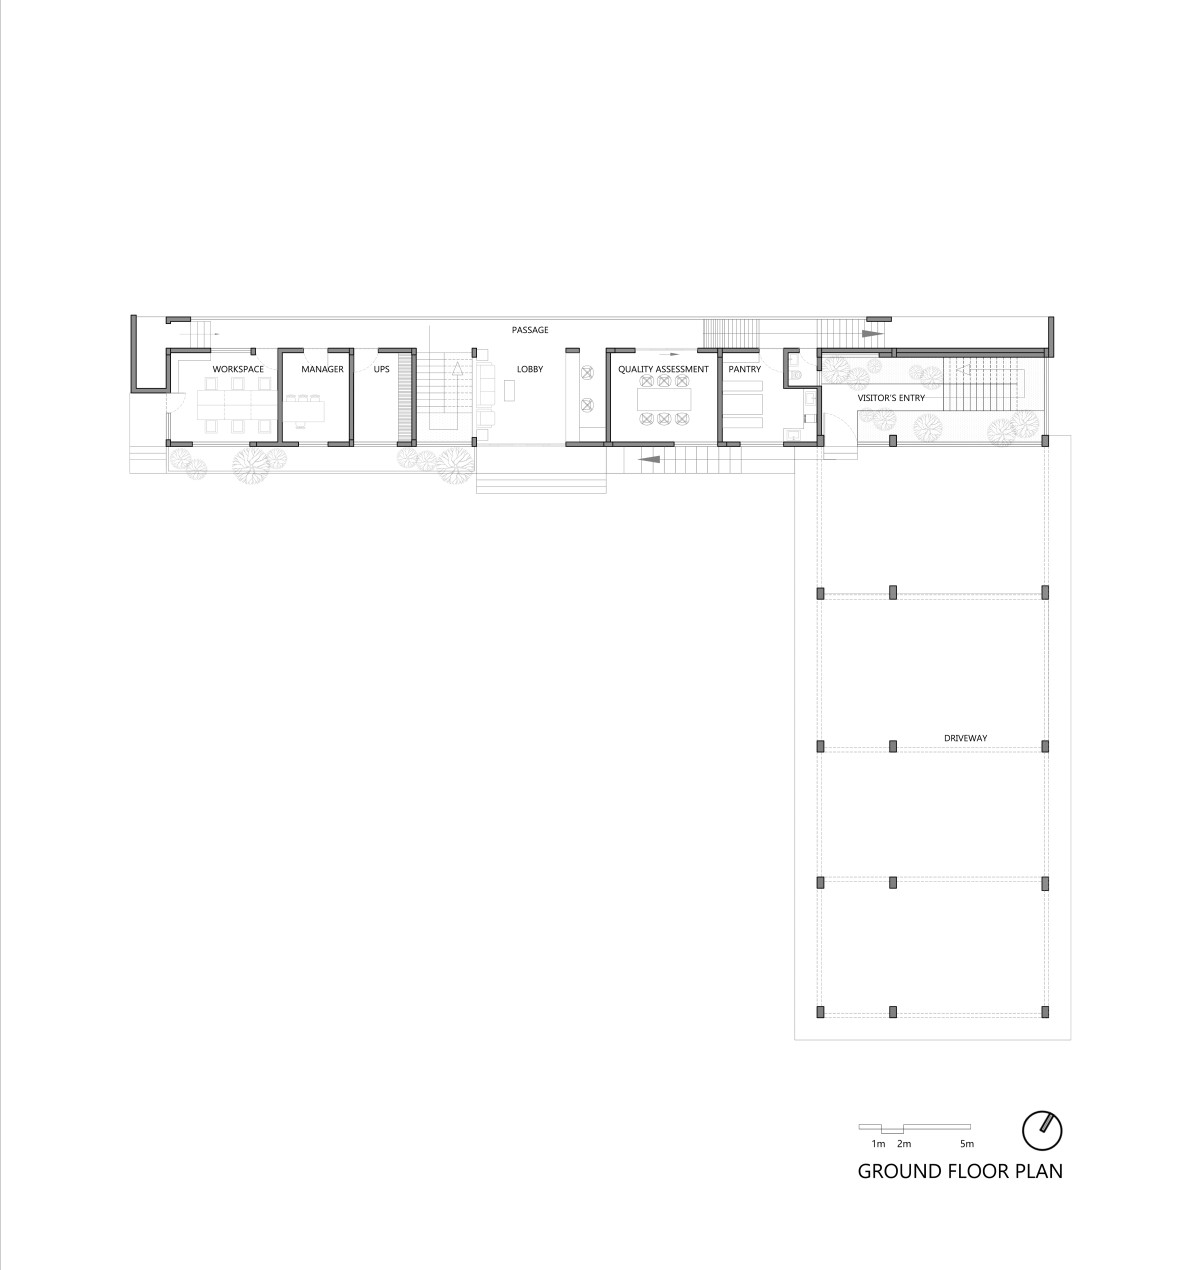 Ground floor plan of The Natural Floors by Barefoot Architects